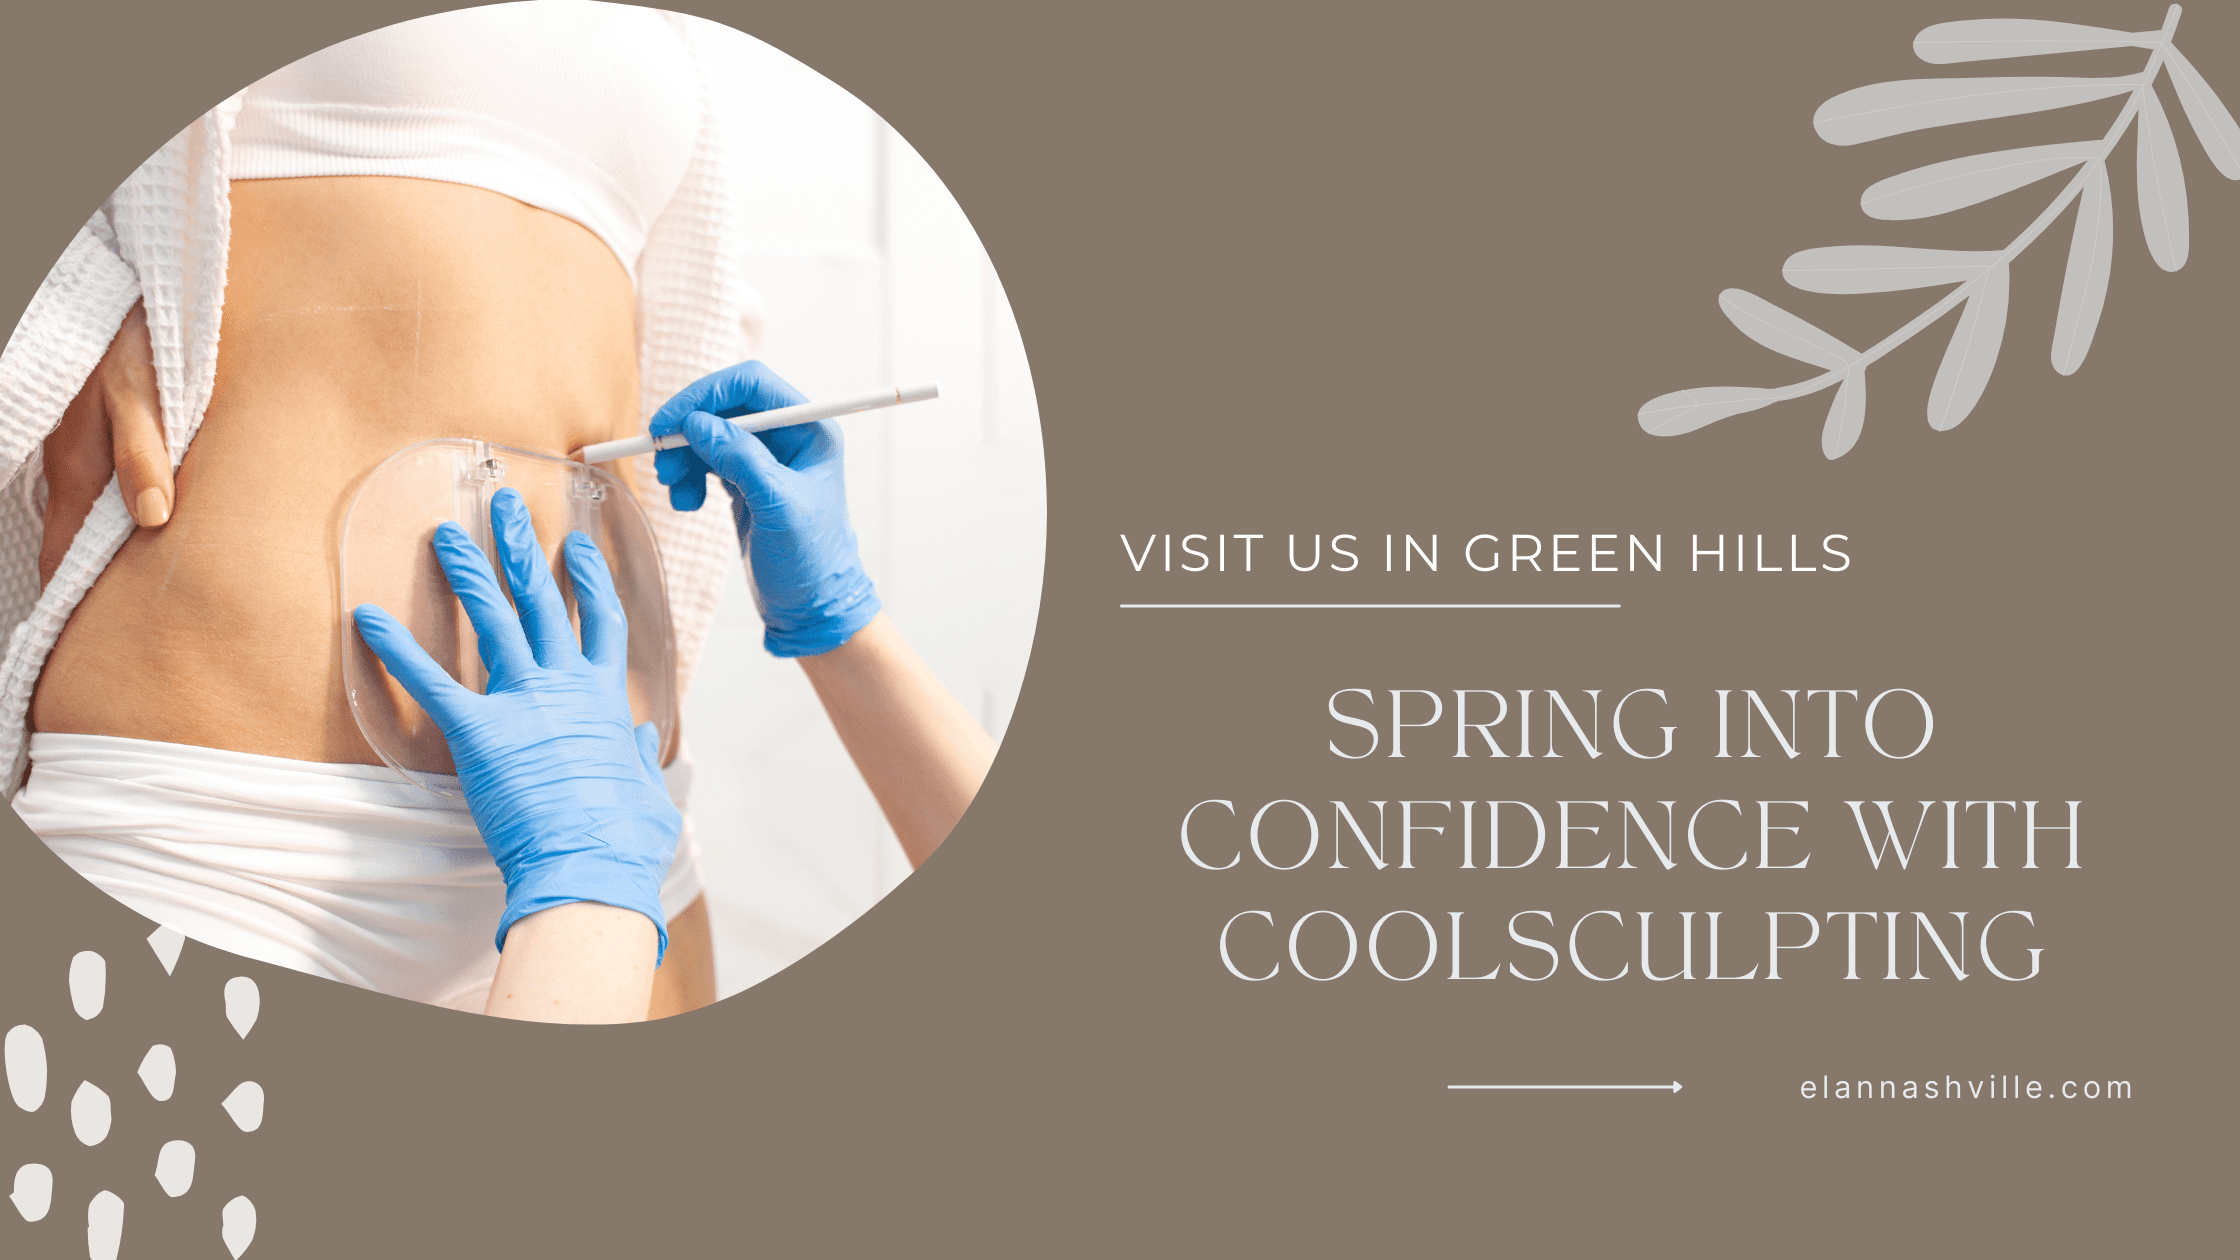 Spring into Confidence with CoolSculpting